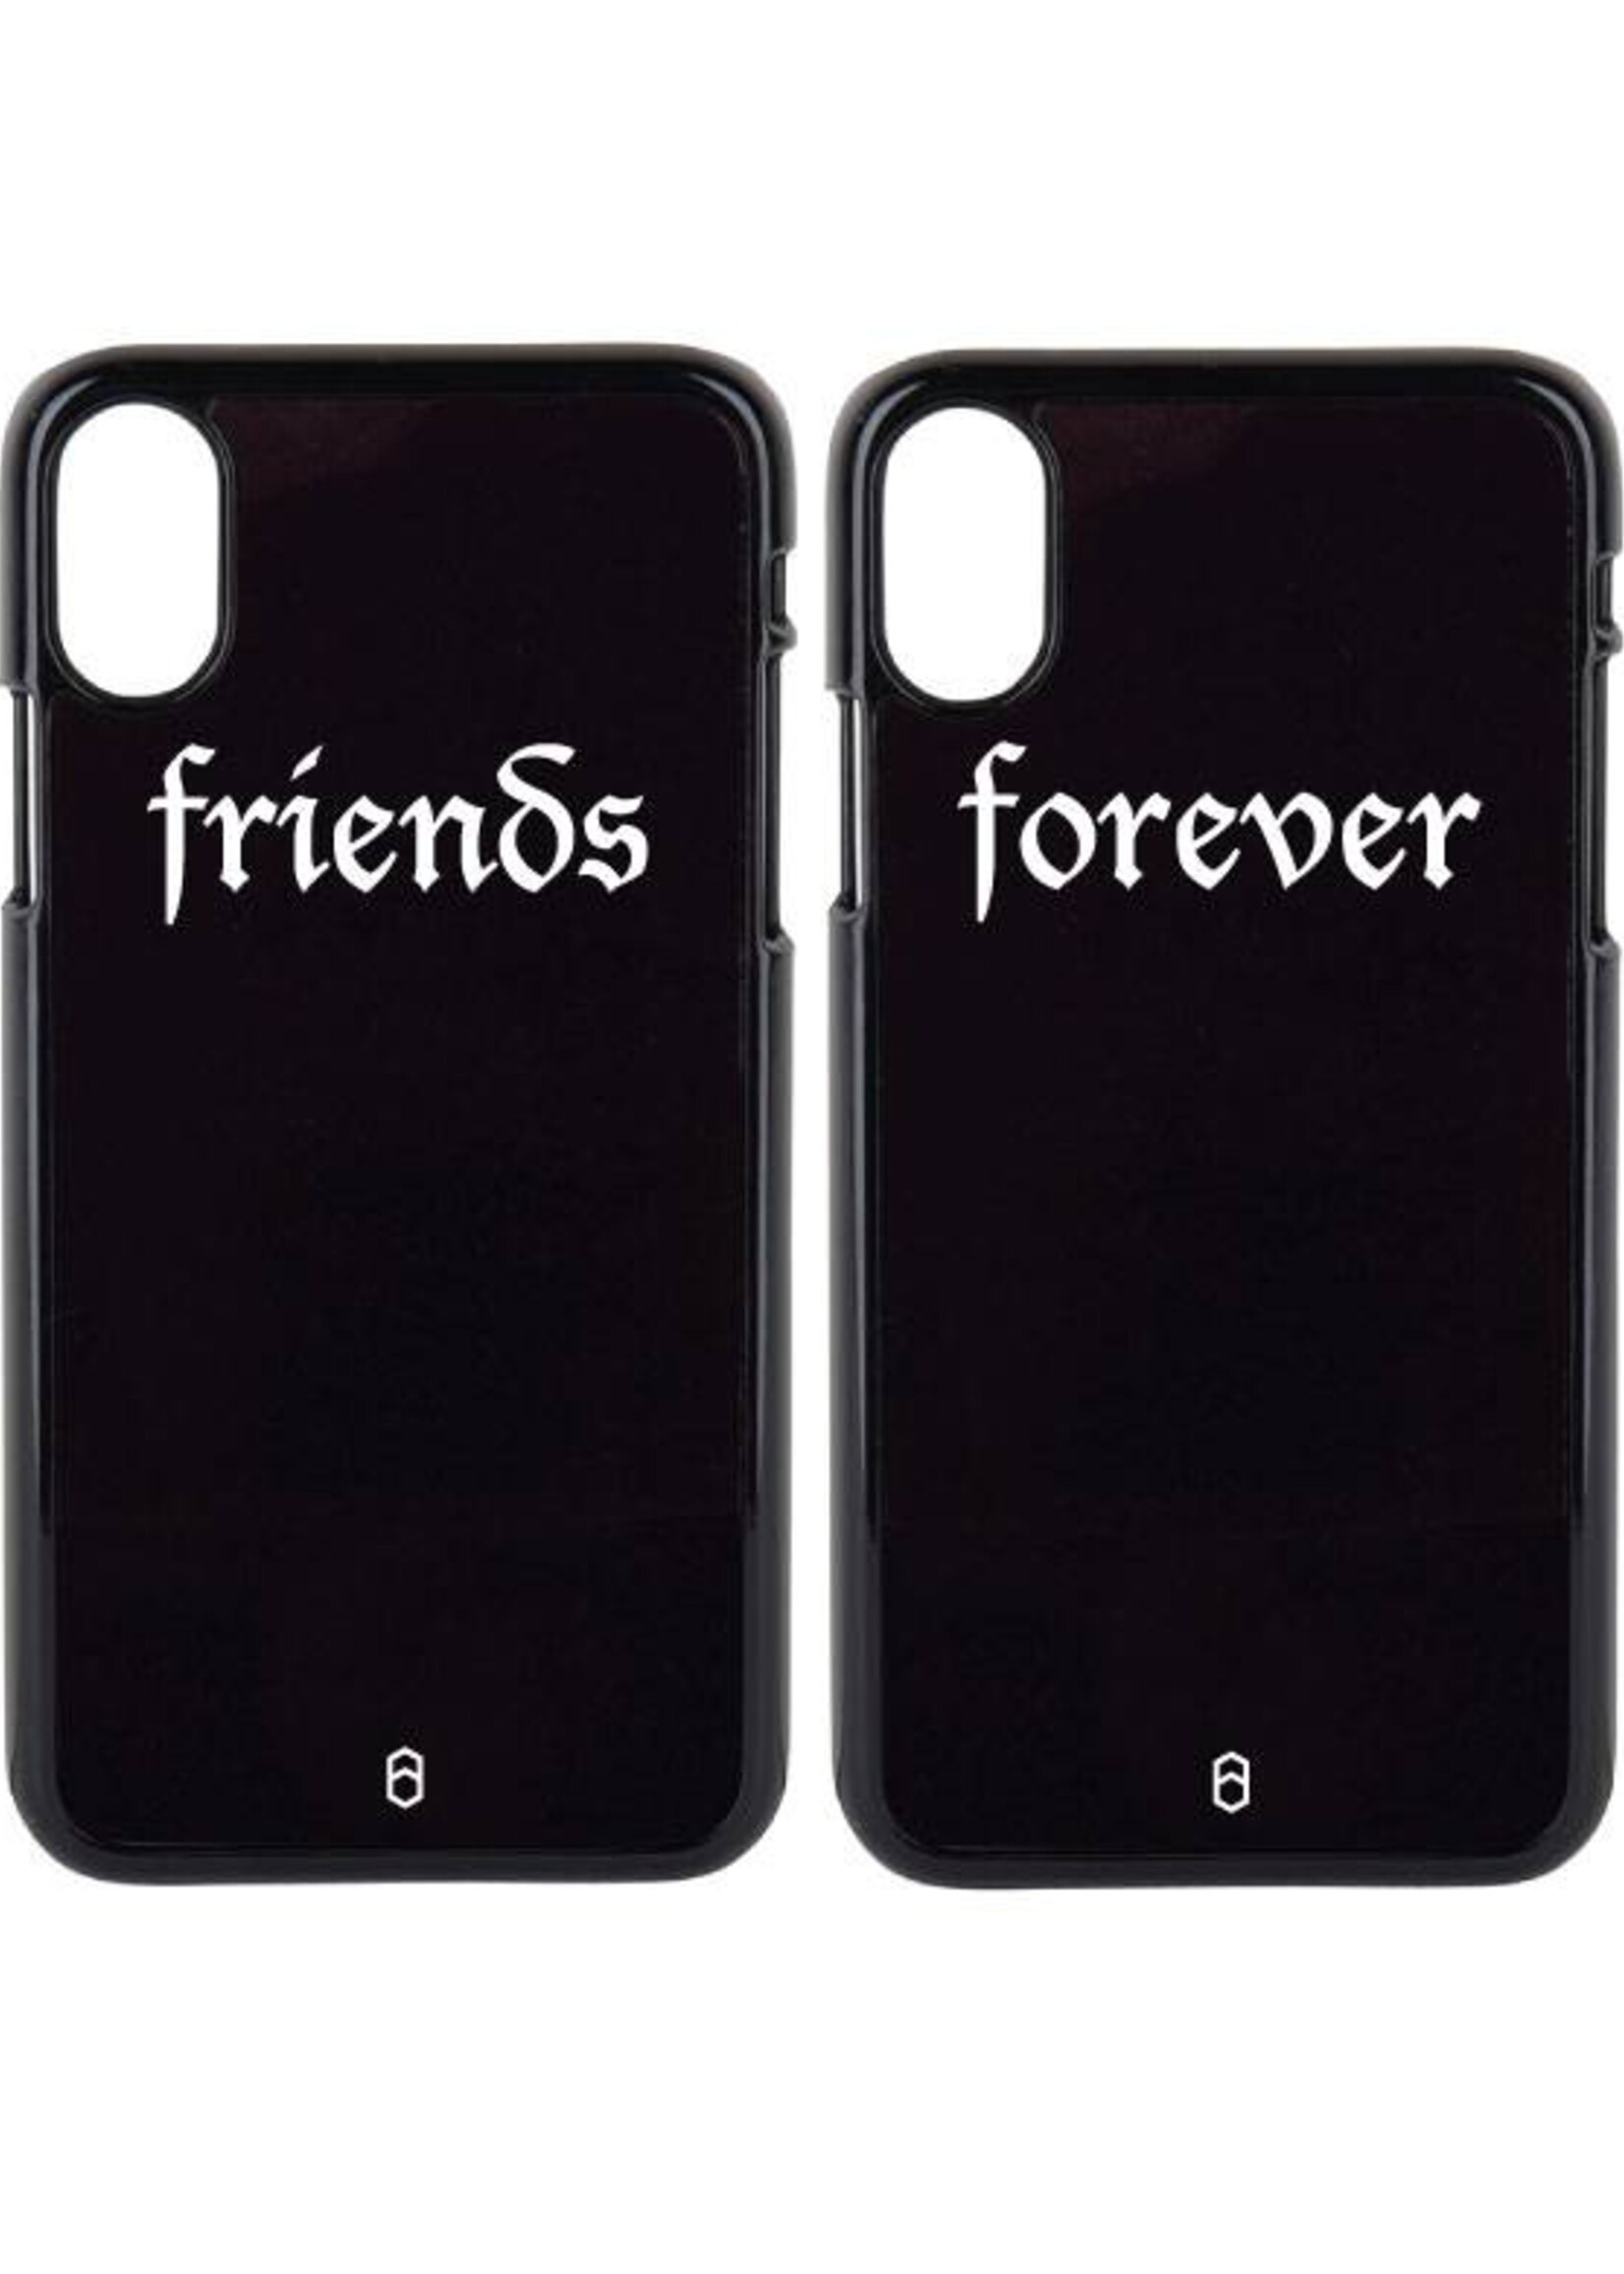 FRIENDS FOREVER CASES